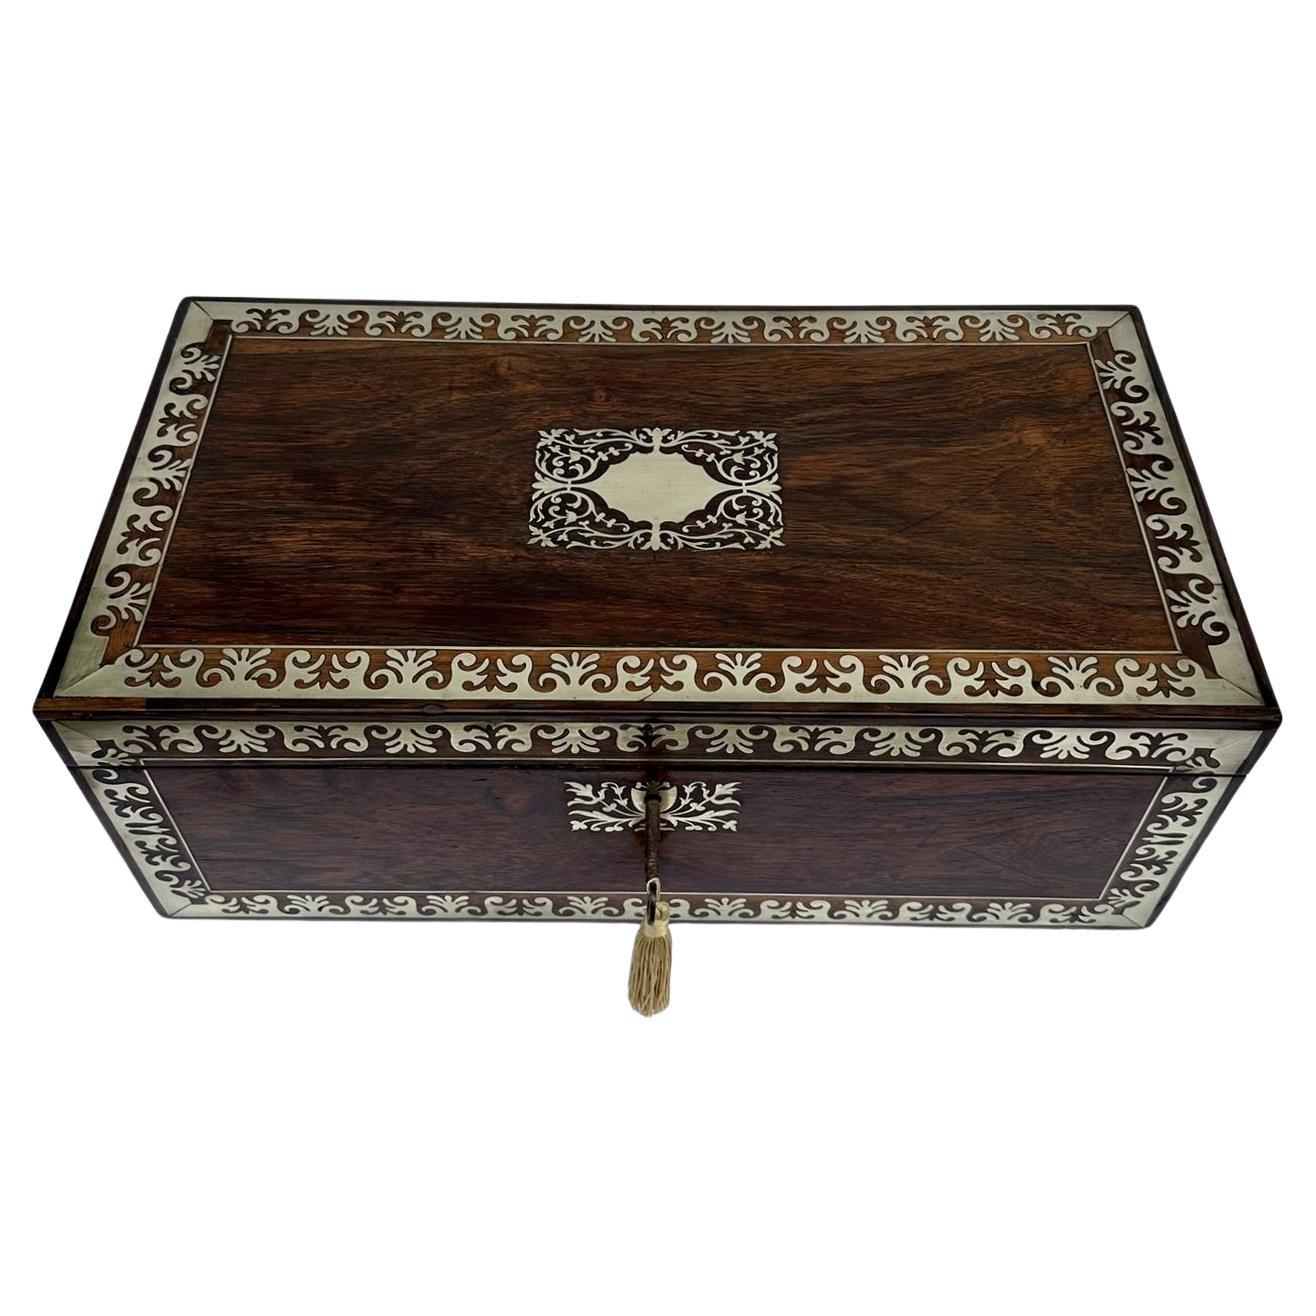 Antique Regency Brass Inlaid Mahogany Traveling Desk Wooden Writing Slope Box For Sale